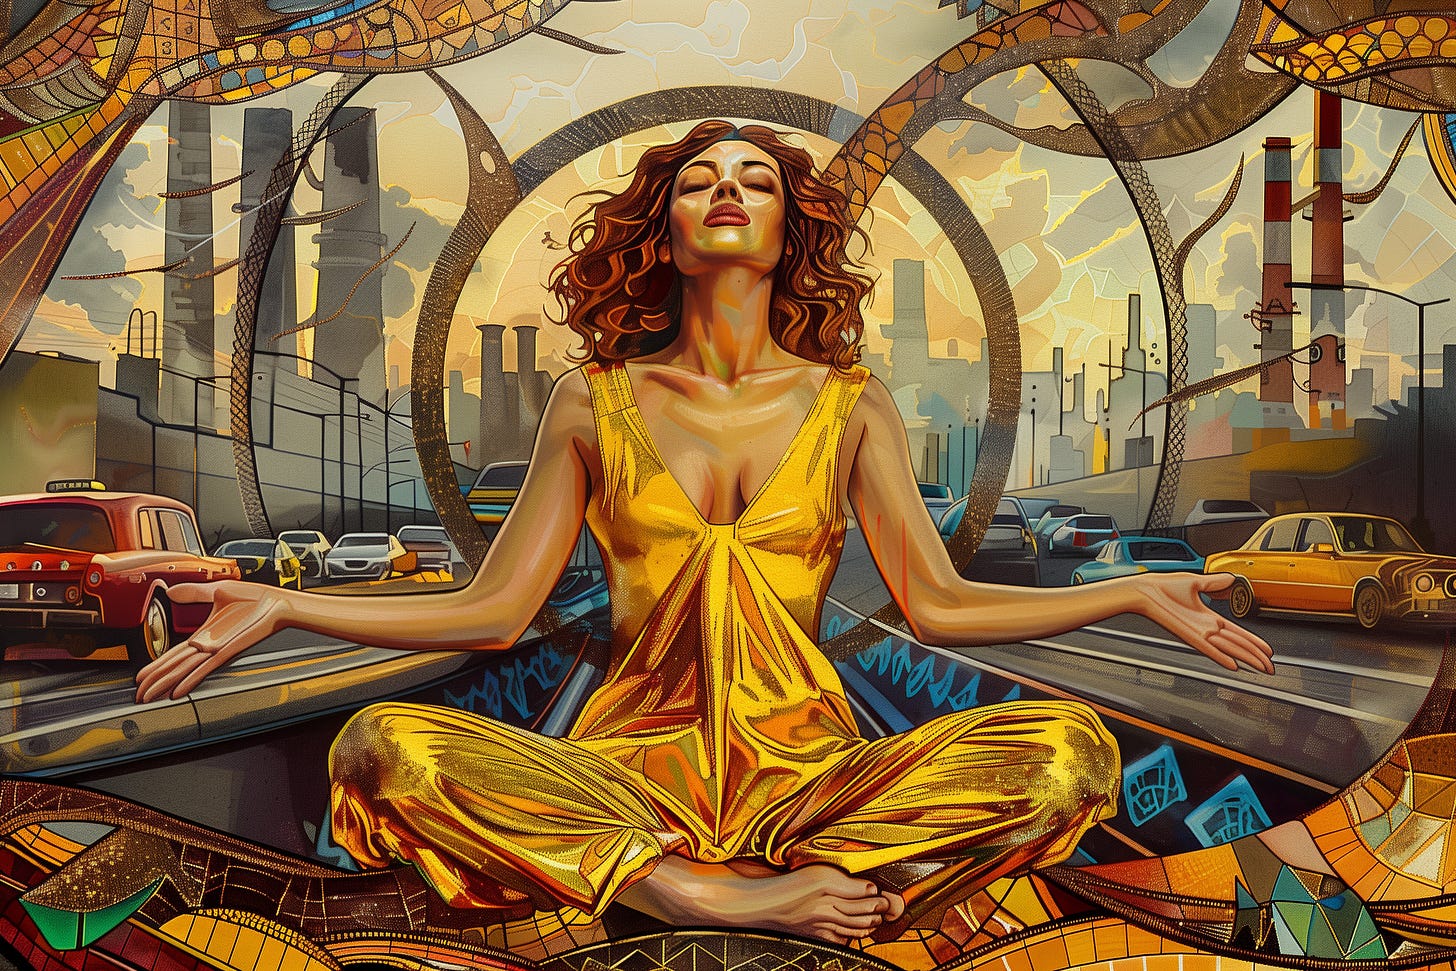 A beautiful lady in a golden dress meditating in lotus pose while surrounded by cars and factory chimneys